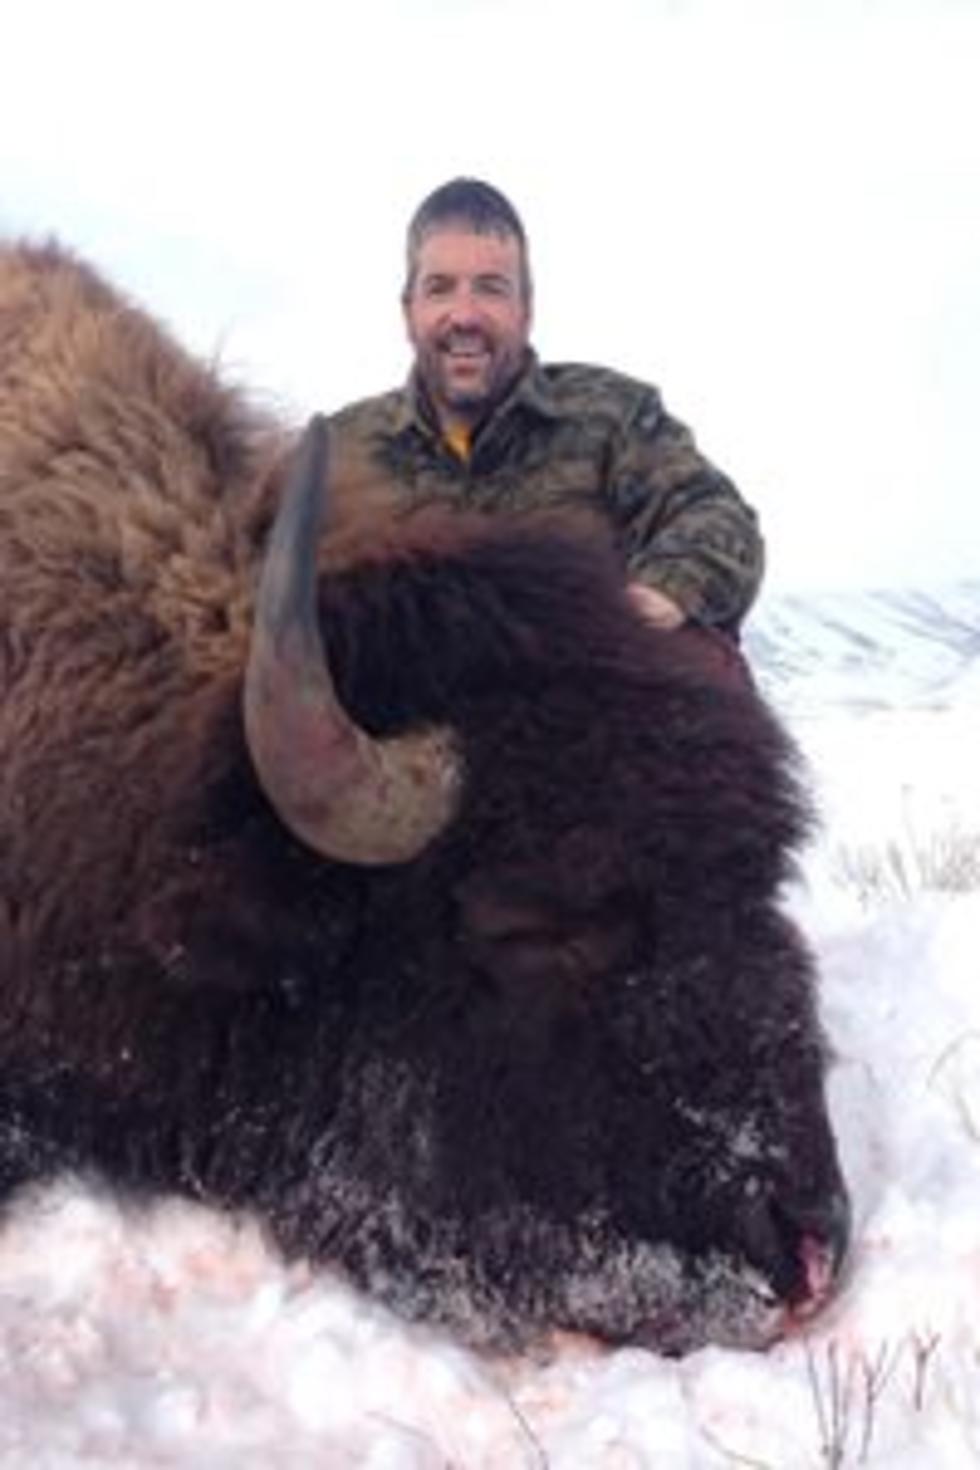 Application Deadline For Moose, Sheep, Goat And Wild Buffalo Hunting Tags Today February 29th